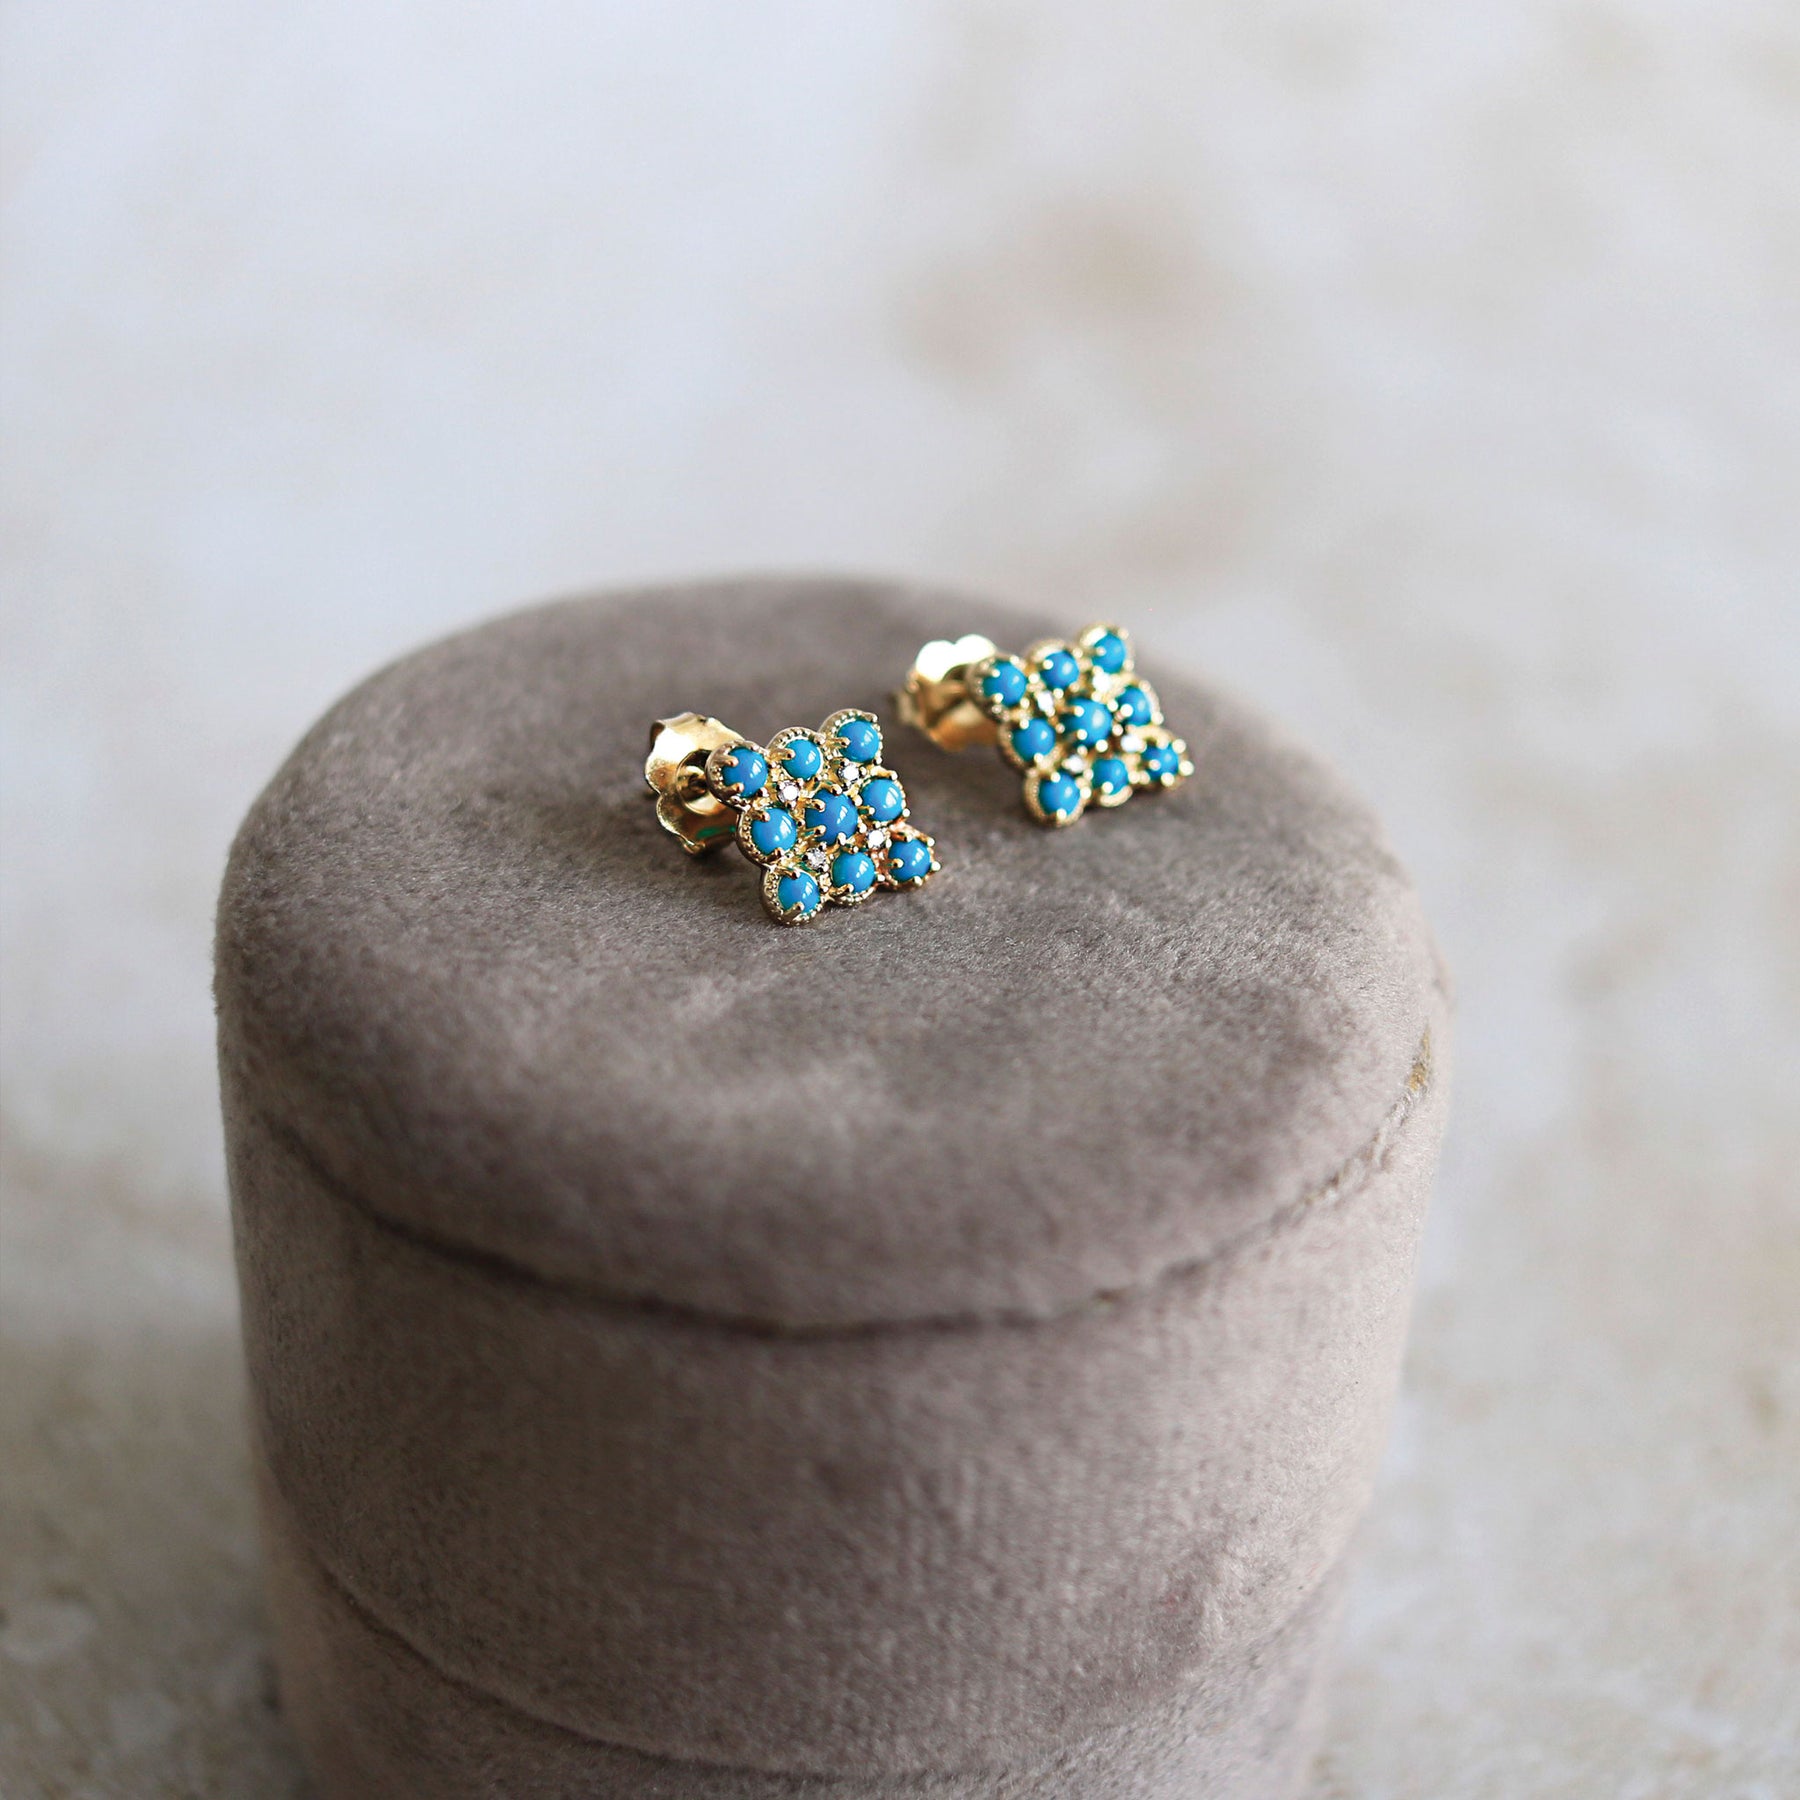 Geometric Earrings with Natural Diamonds and Turquoise